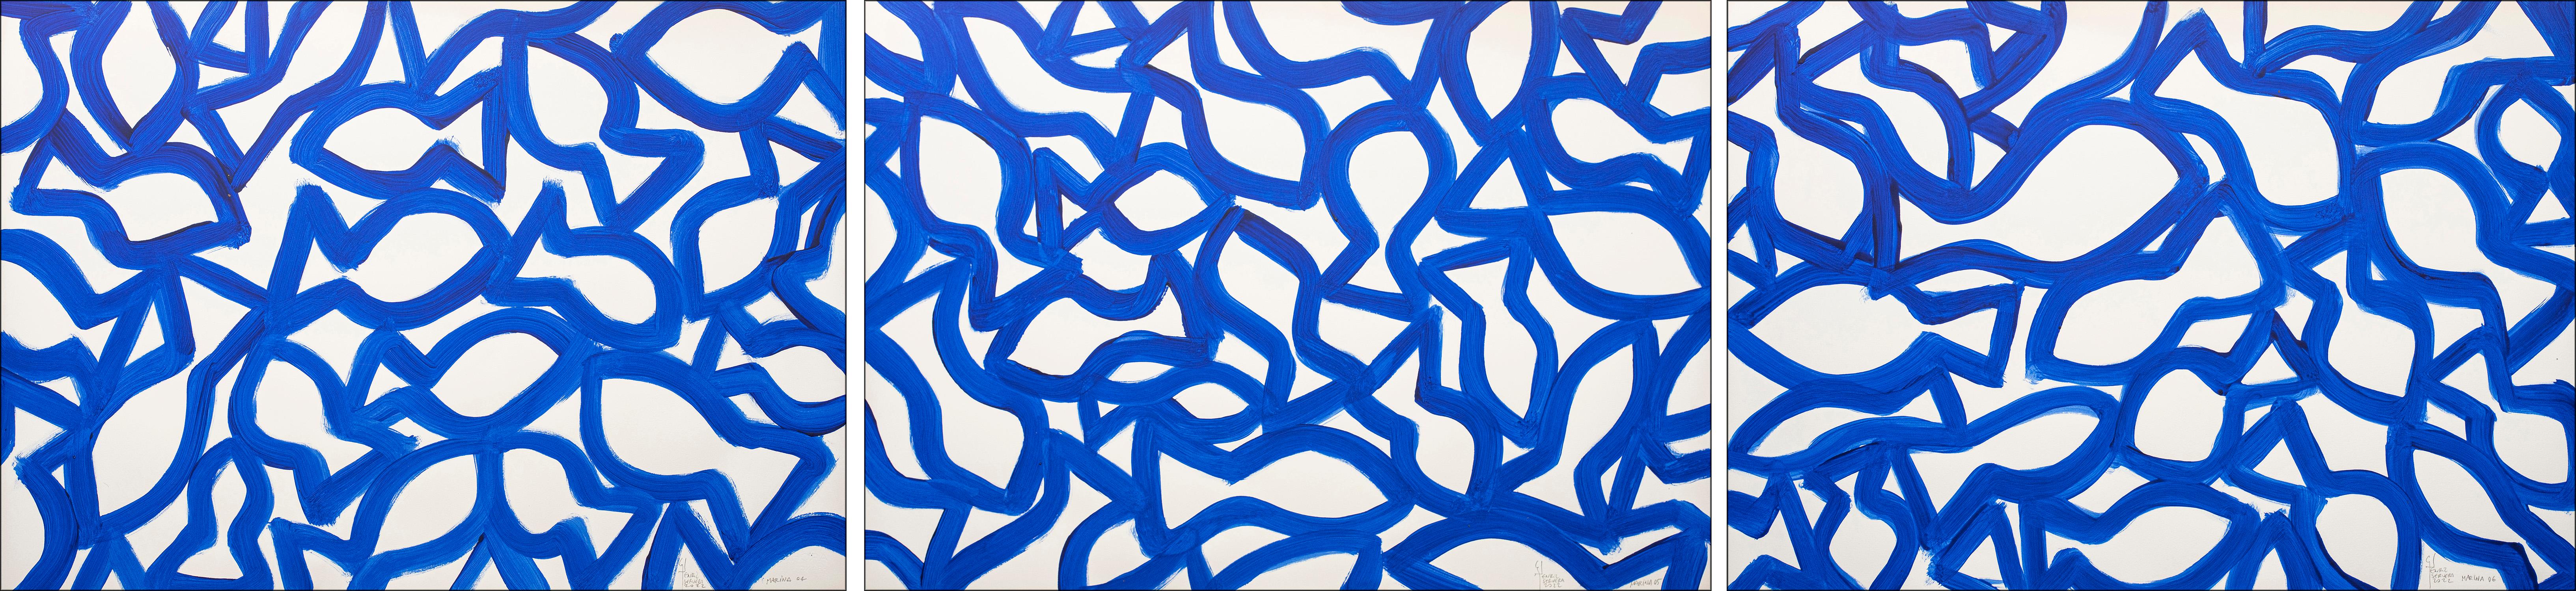 Enric Servera Abstract Painting - Marina Triptych, Abstract Fish Shapes on Paper, Mediterranean Blue White Pattern